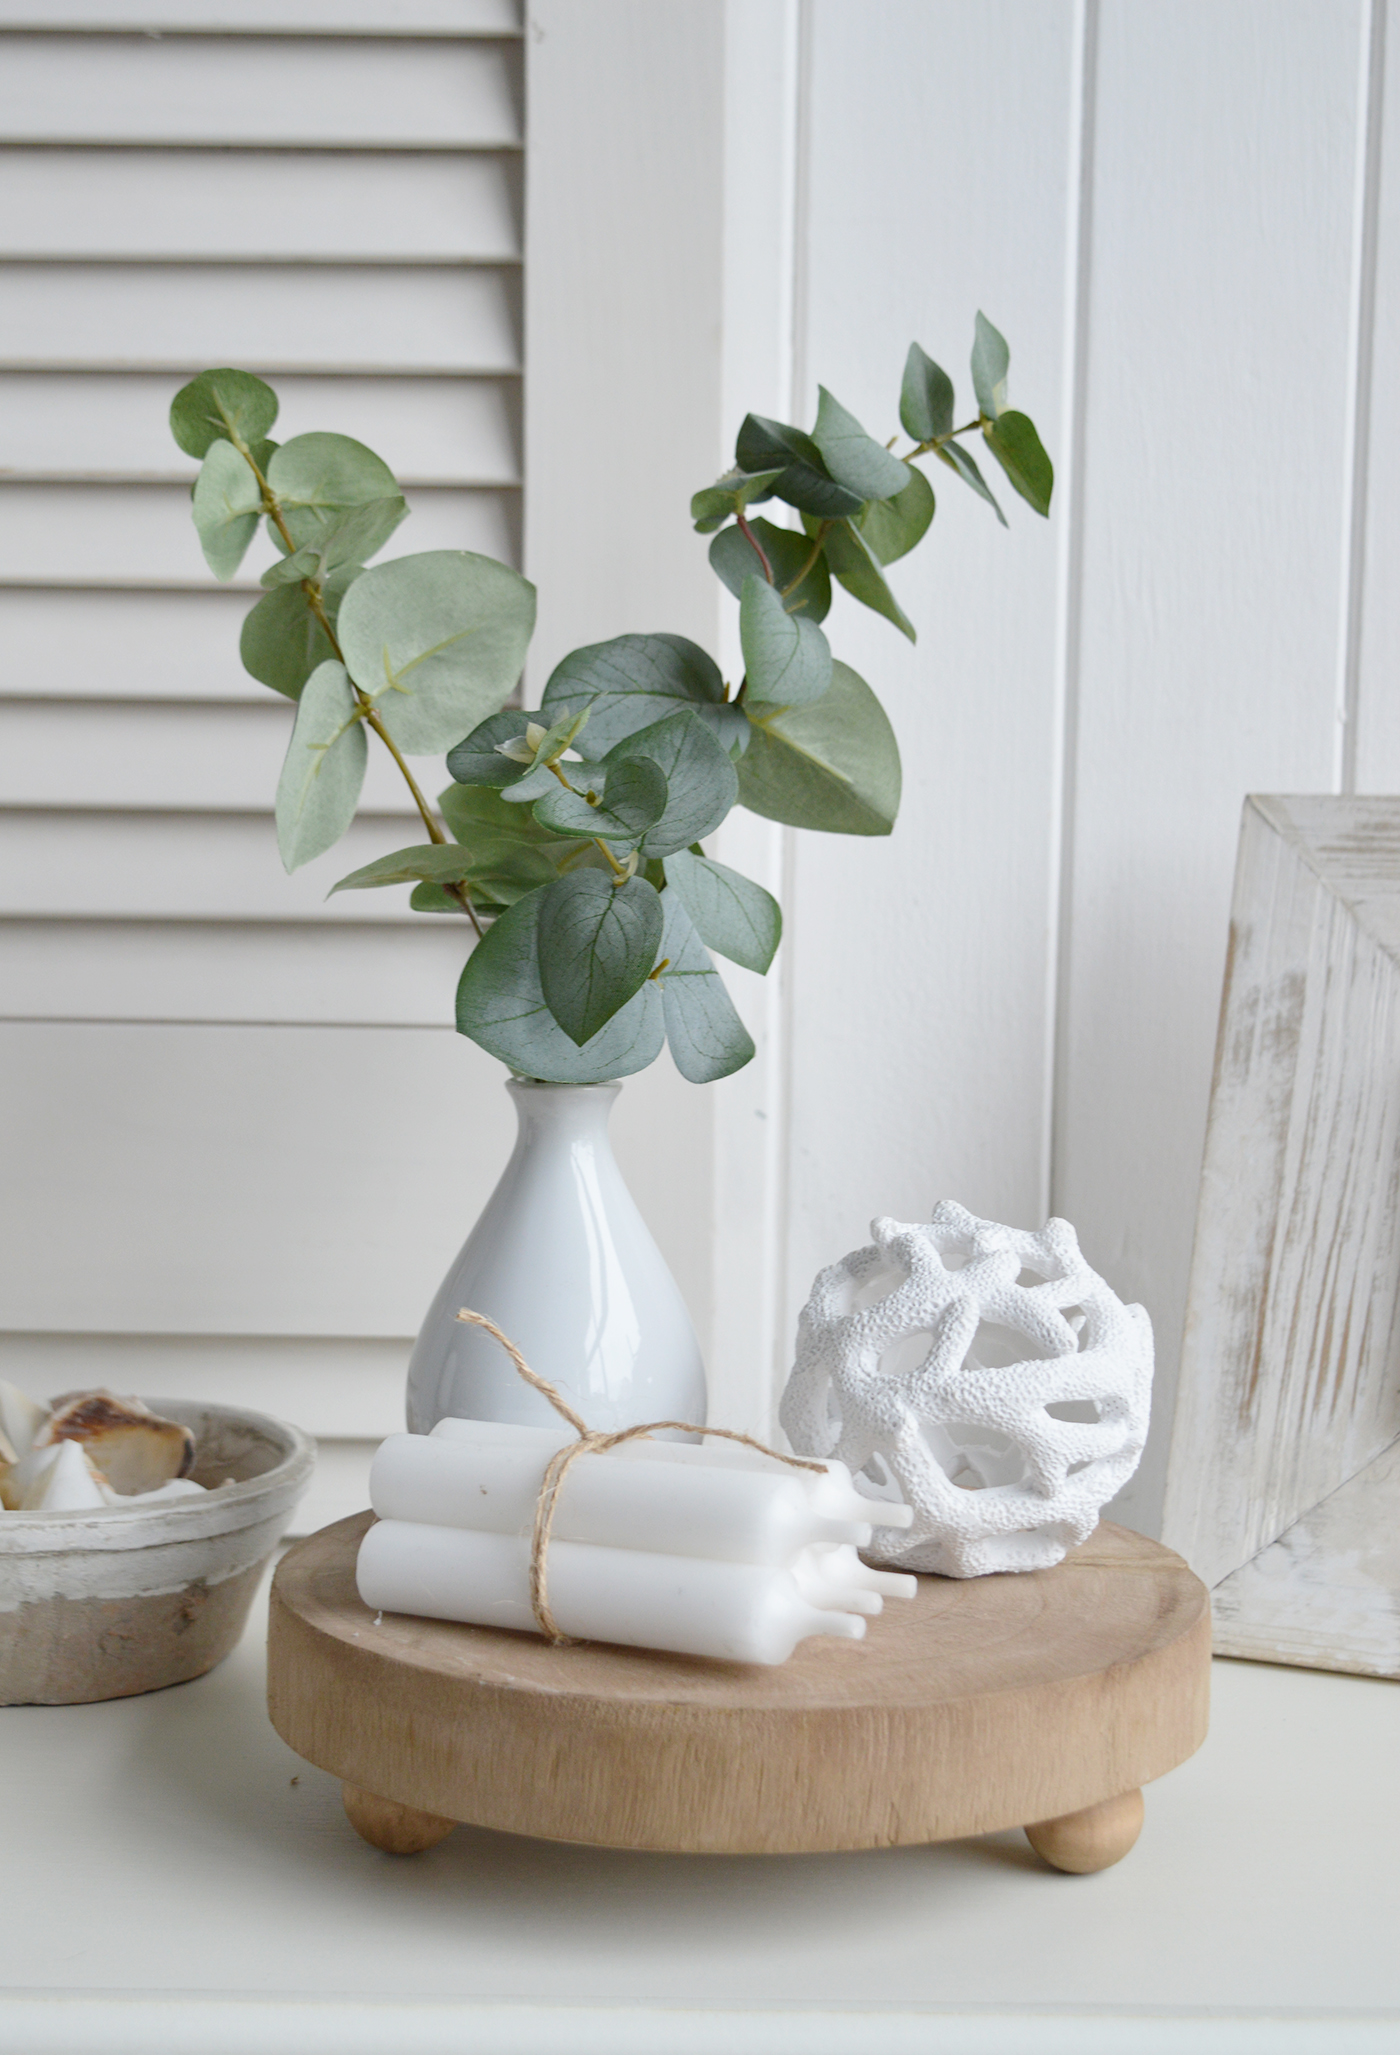 The small resing white coral ball on the Chadwick tray with Eucalyptus